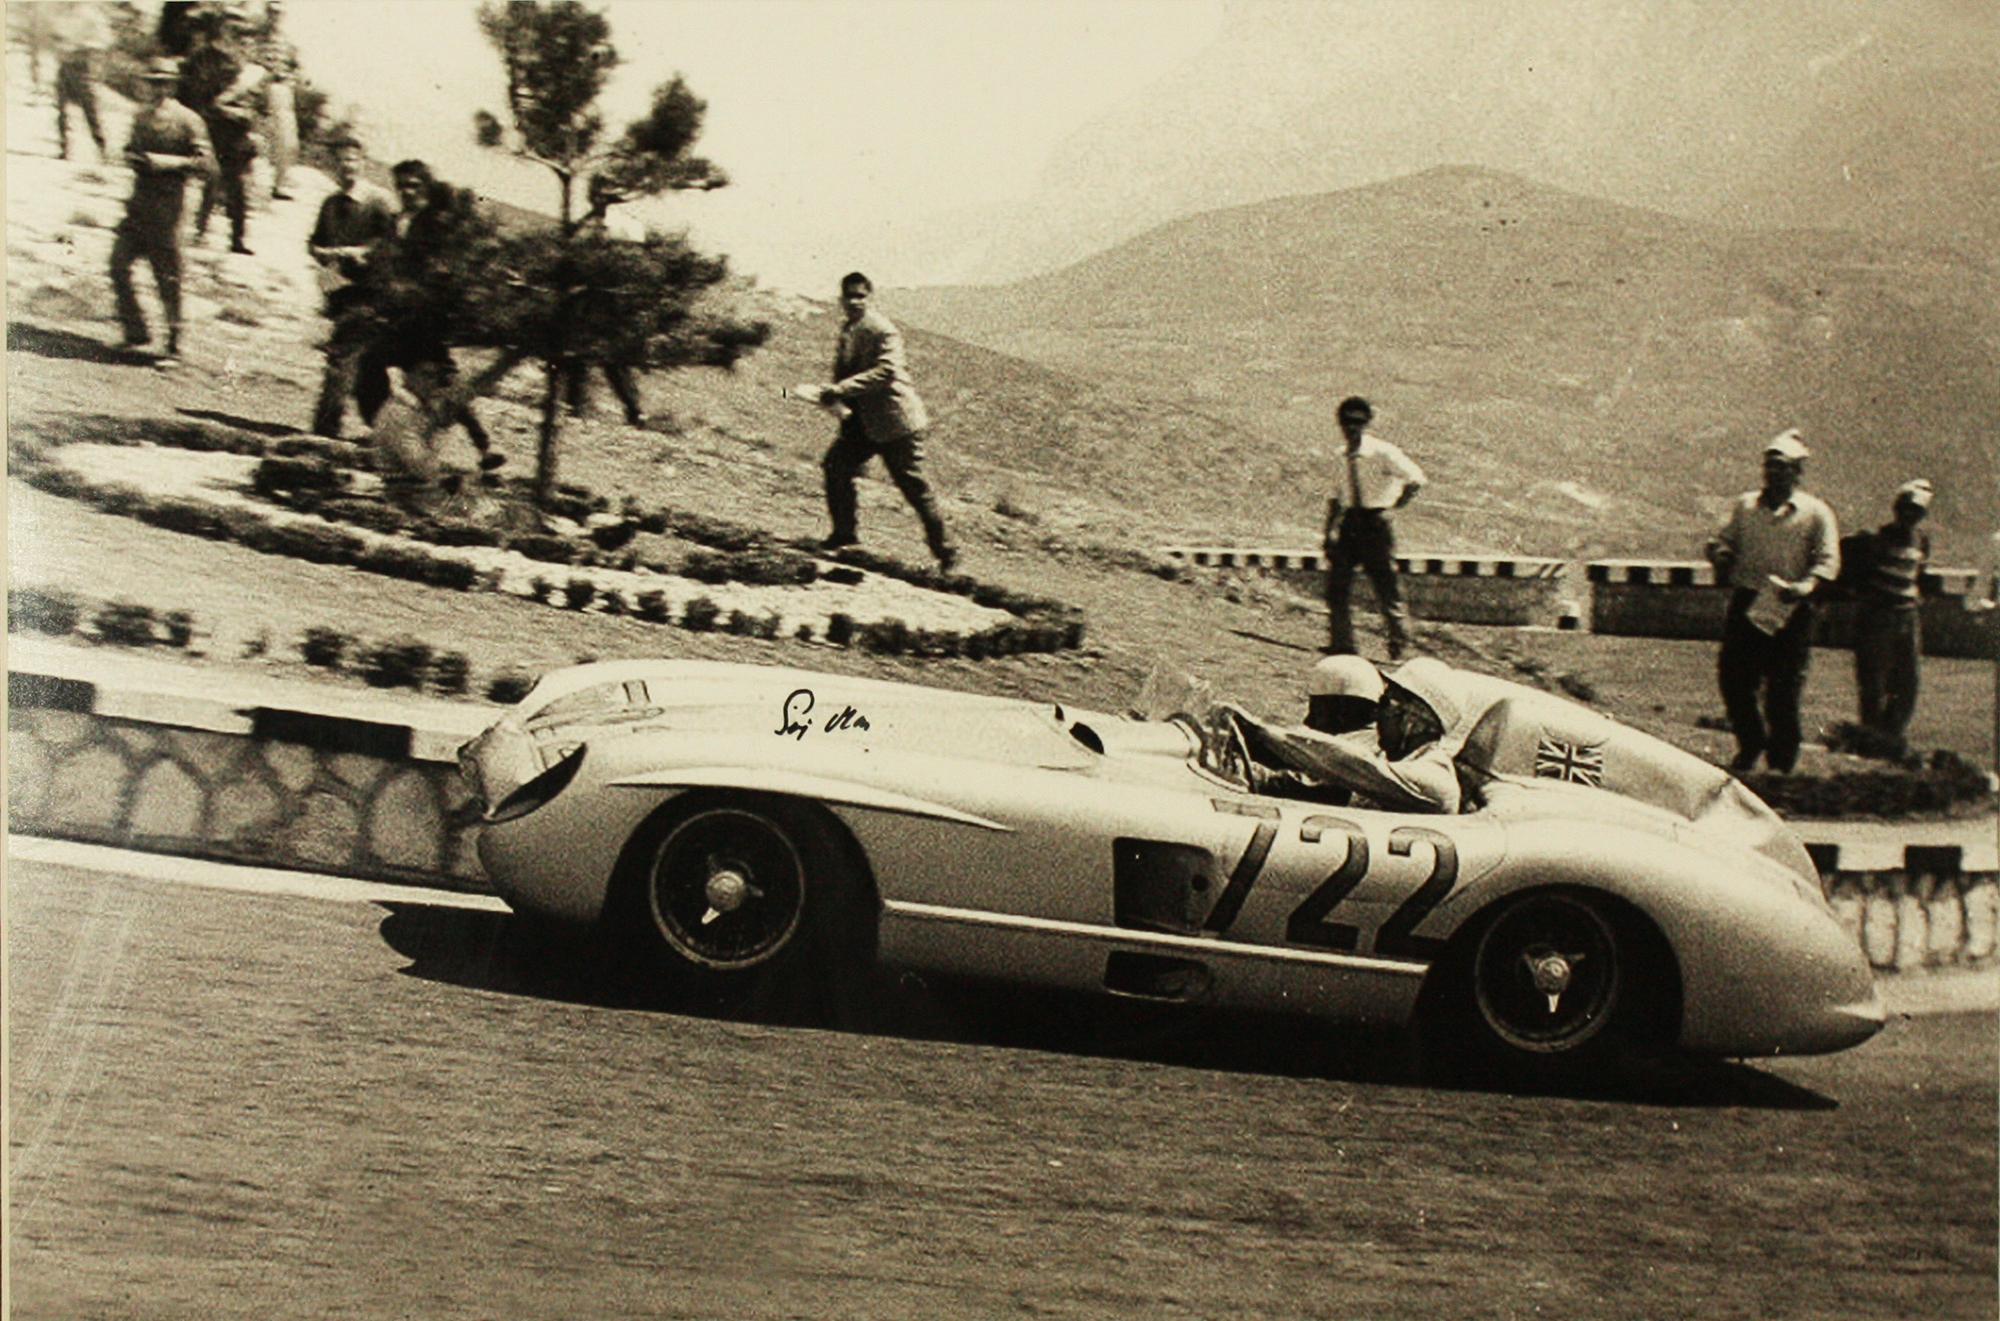 Mercedes Benz 300SLR, No 722, Mille Miglia 1955 signed by Stirling Moss - Photograph by Unknown